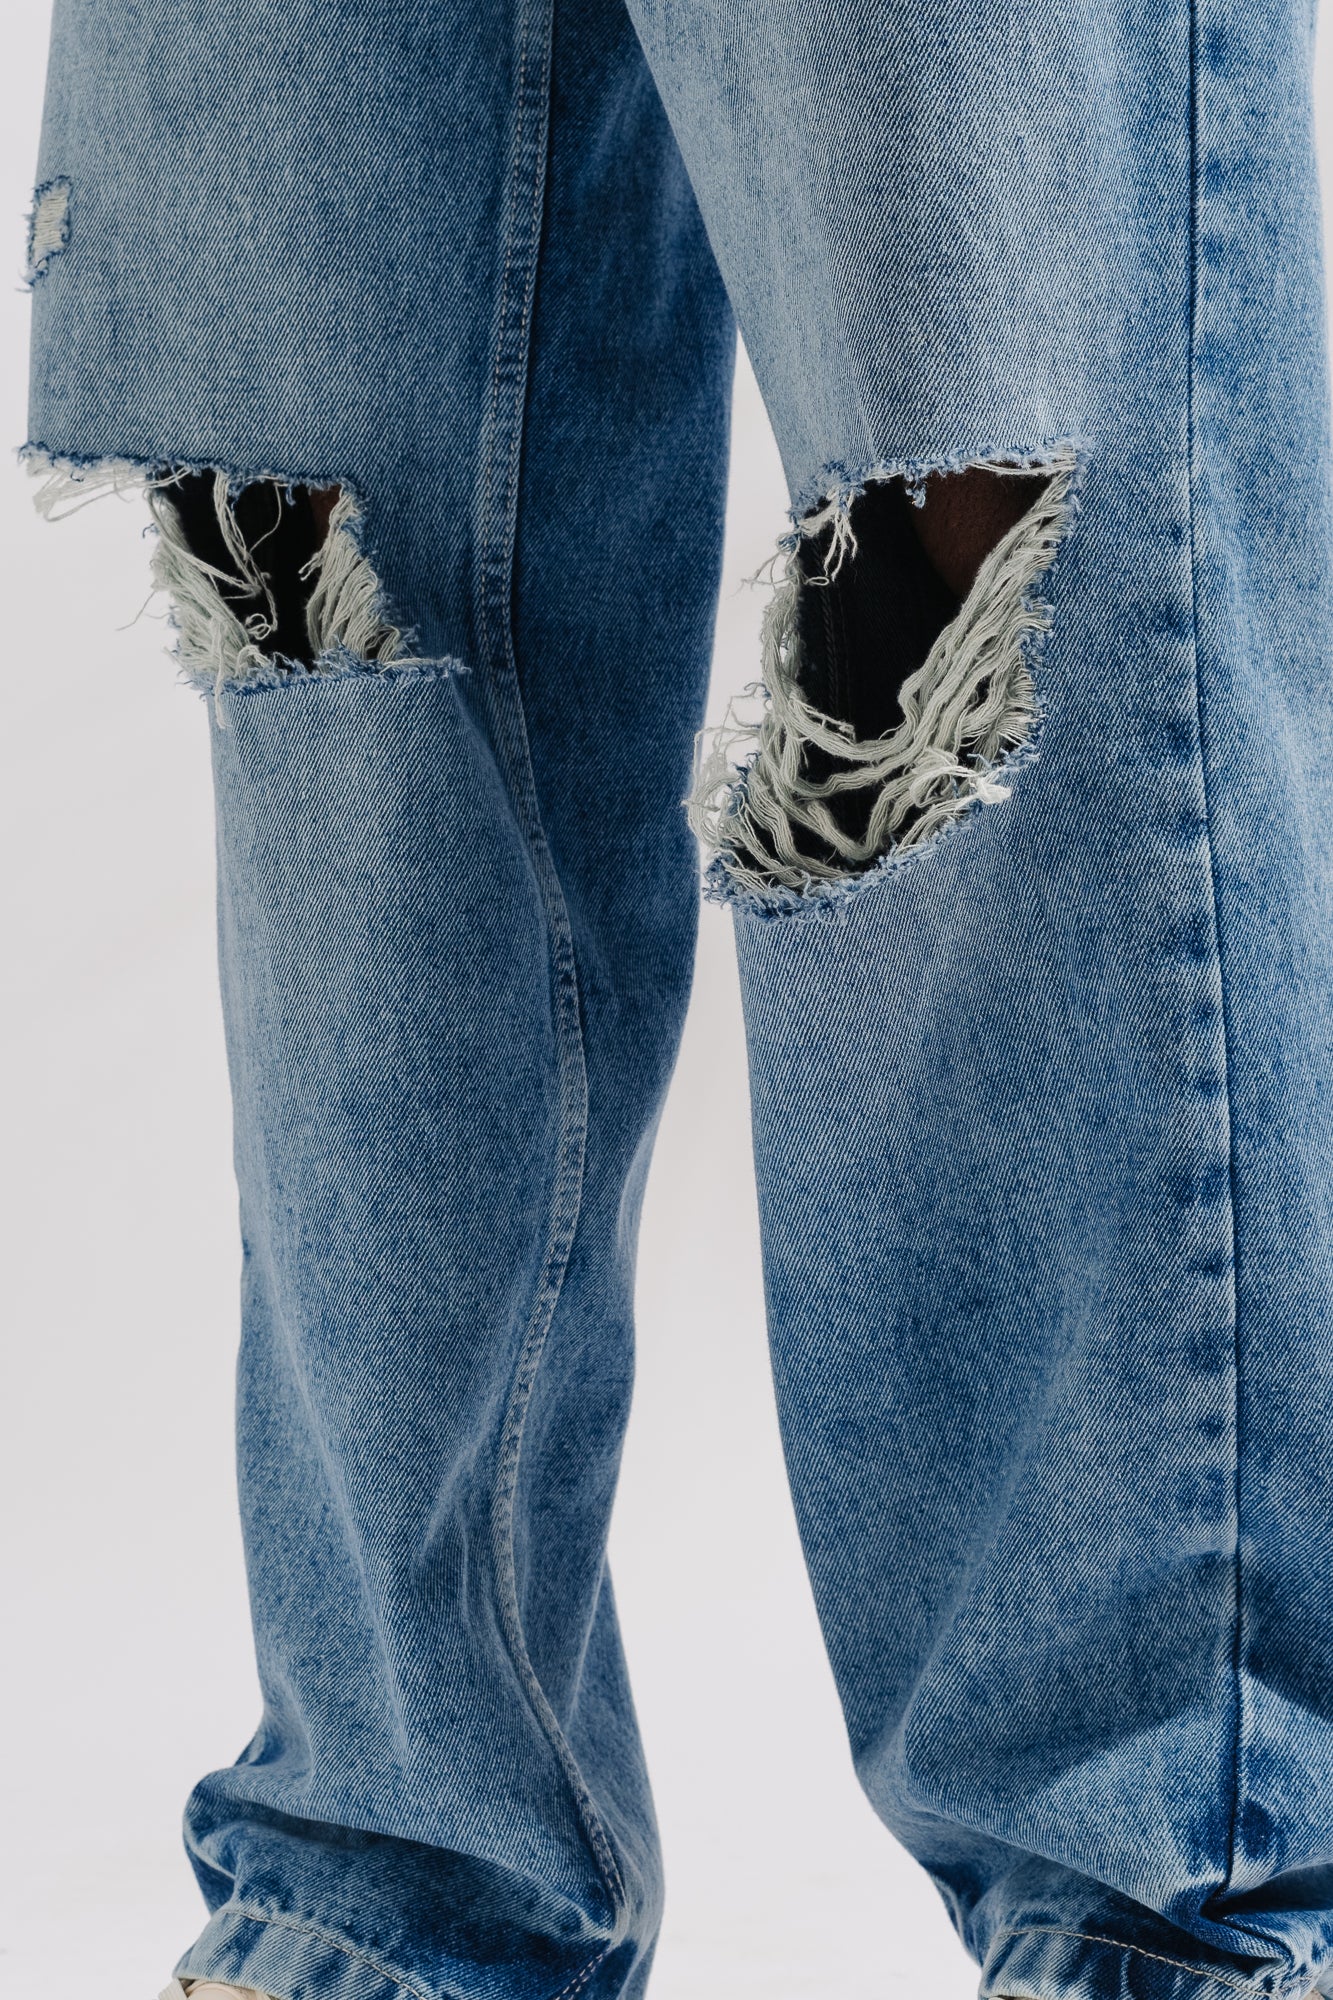 MEN'S KNEE RIPPED STRAIGHT JEANS